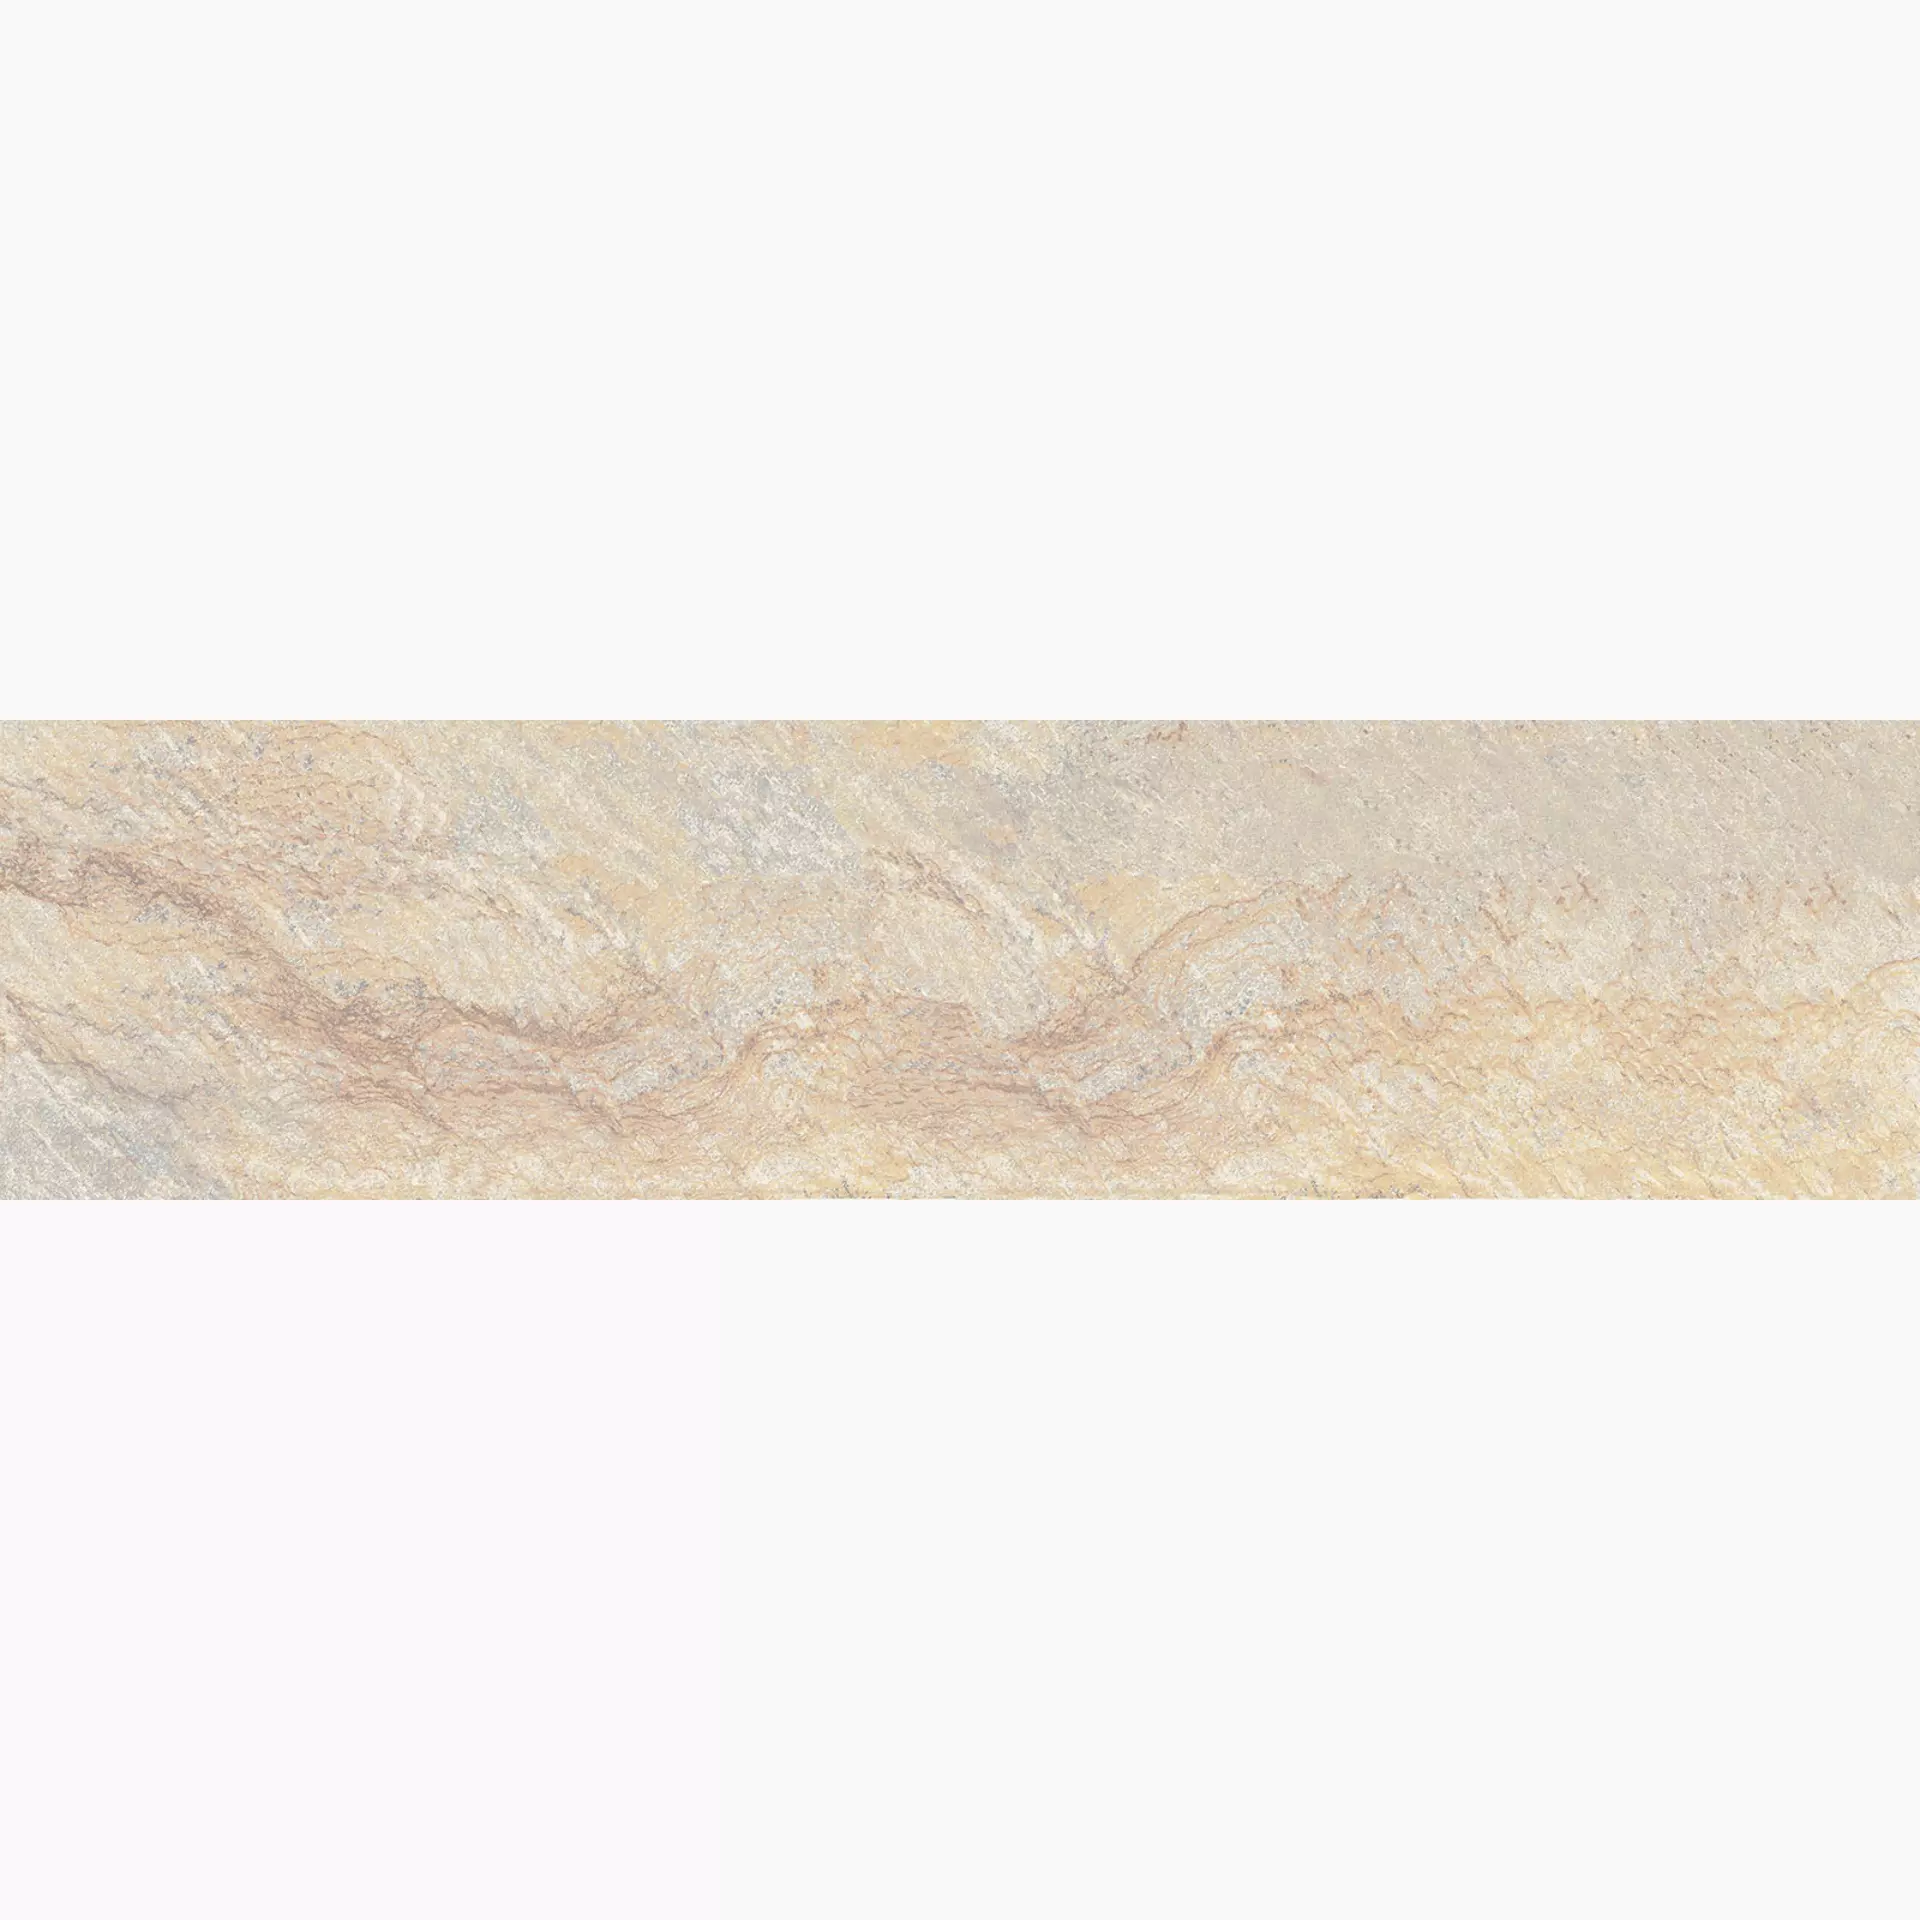 Keope Percorsi Extra Pietra Di Barge Strutturato 4A363531 30x120cm rectified 20mm